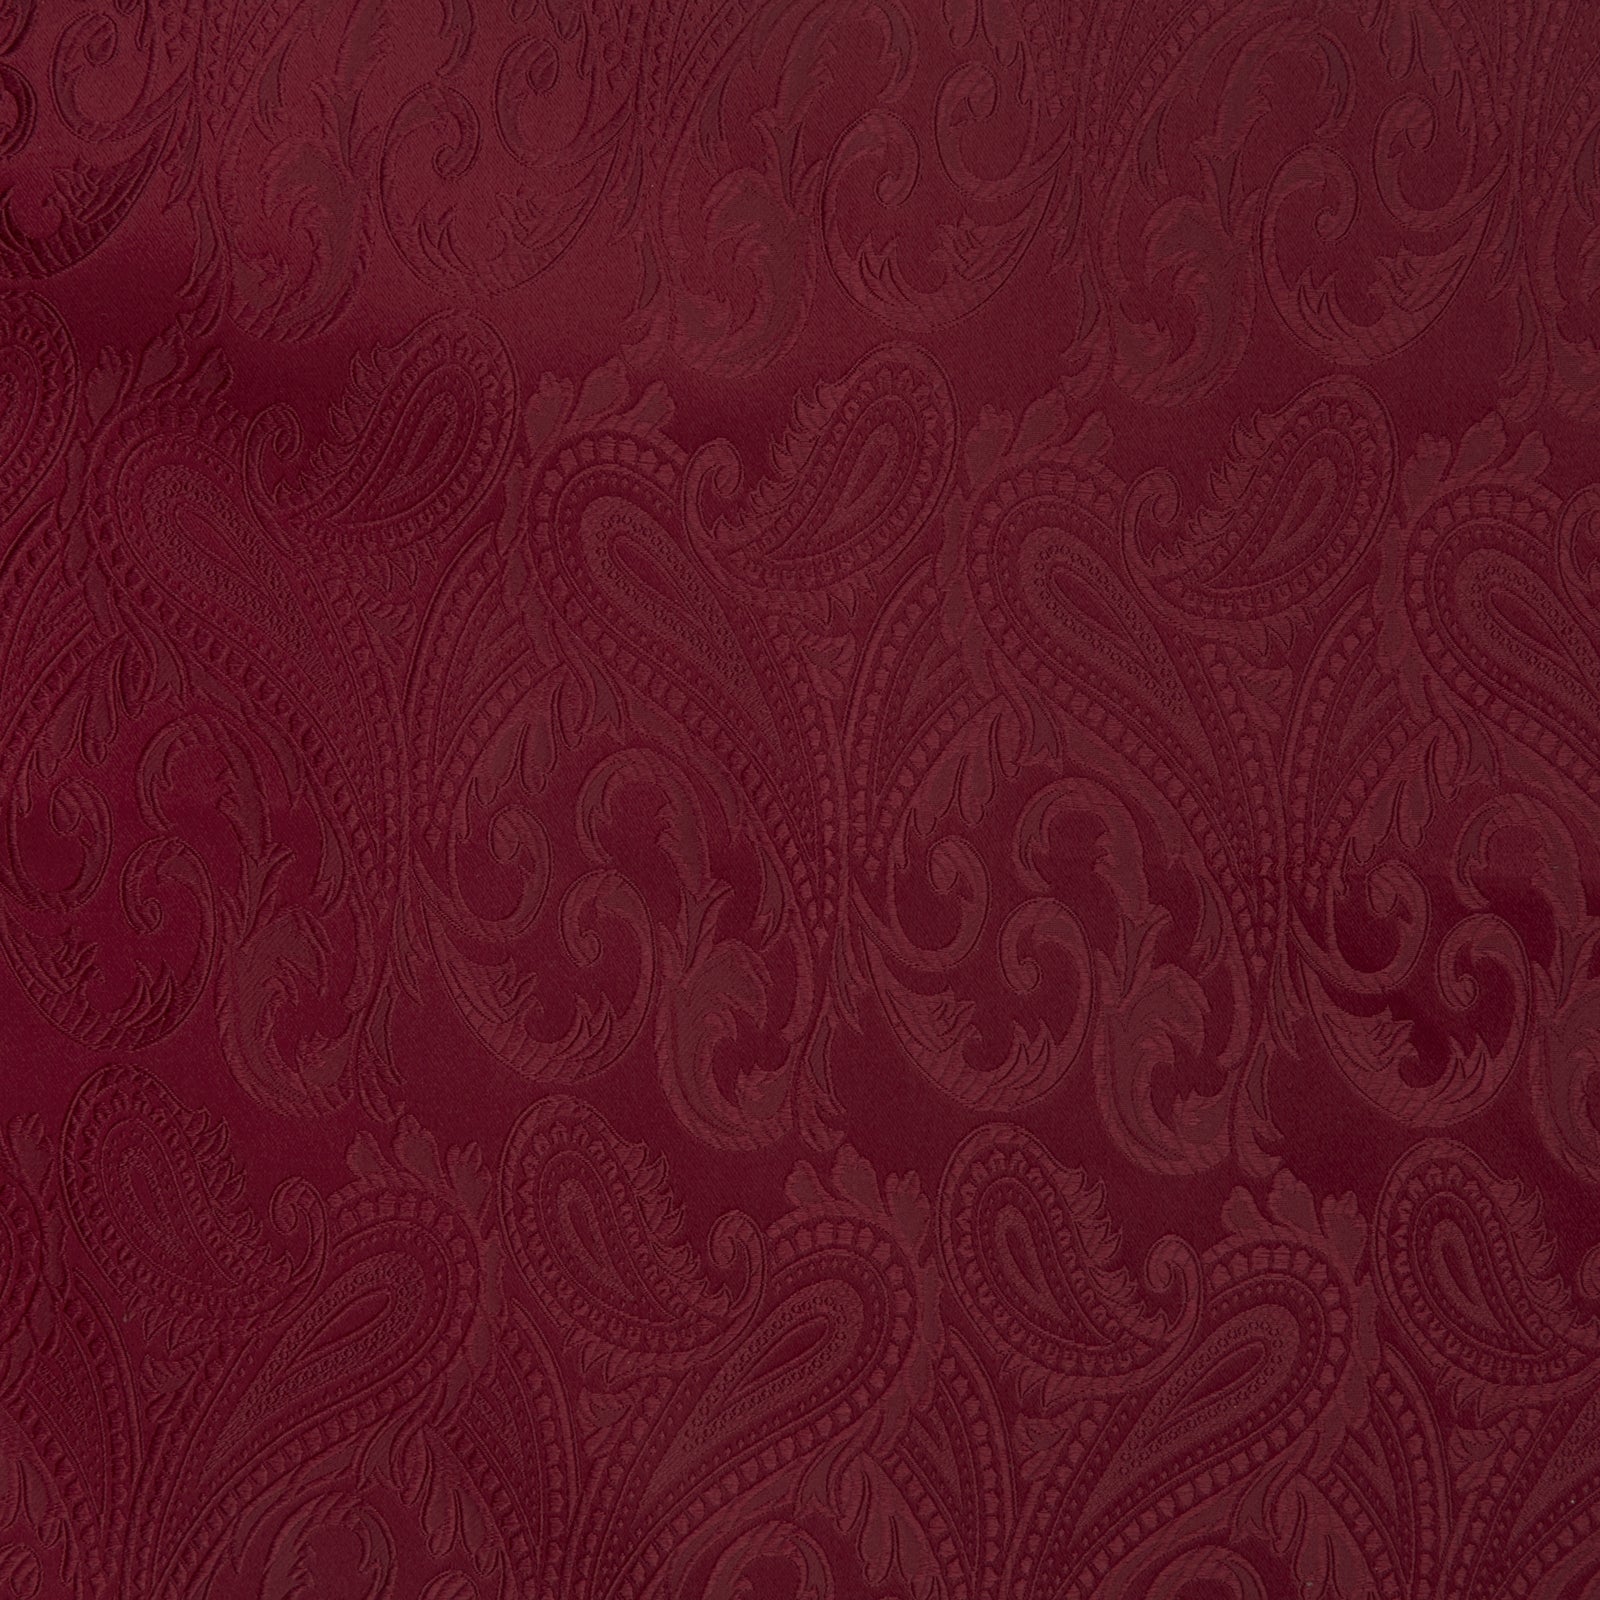 Burgundy House Paisley Hand-Rolled Silk Pocket Square